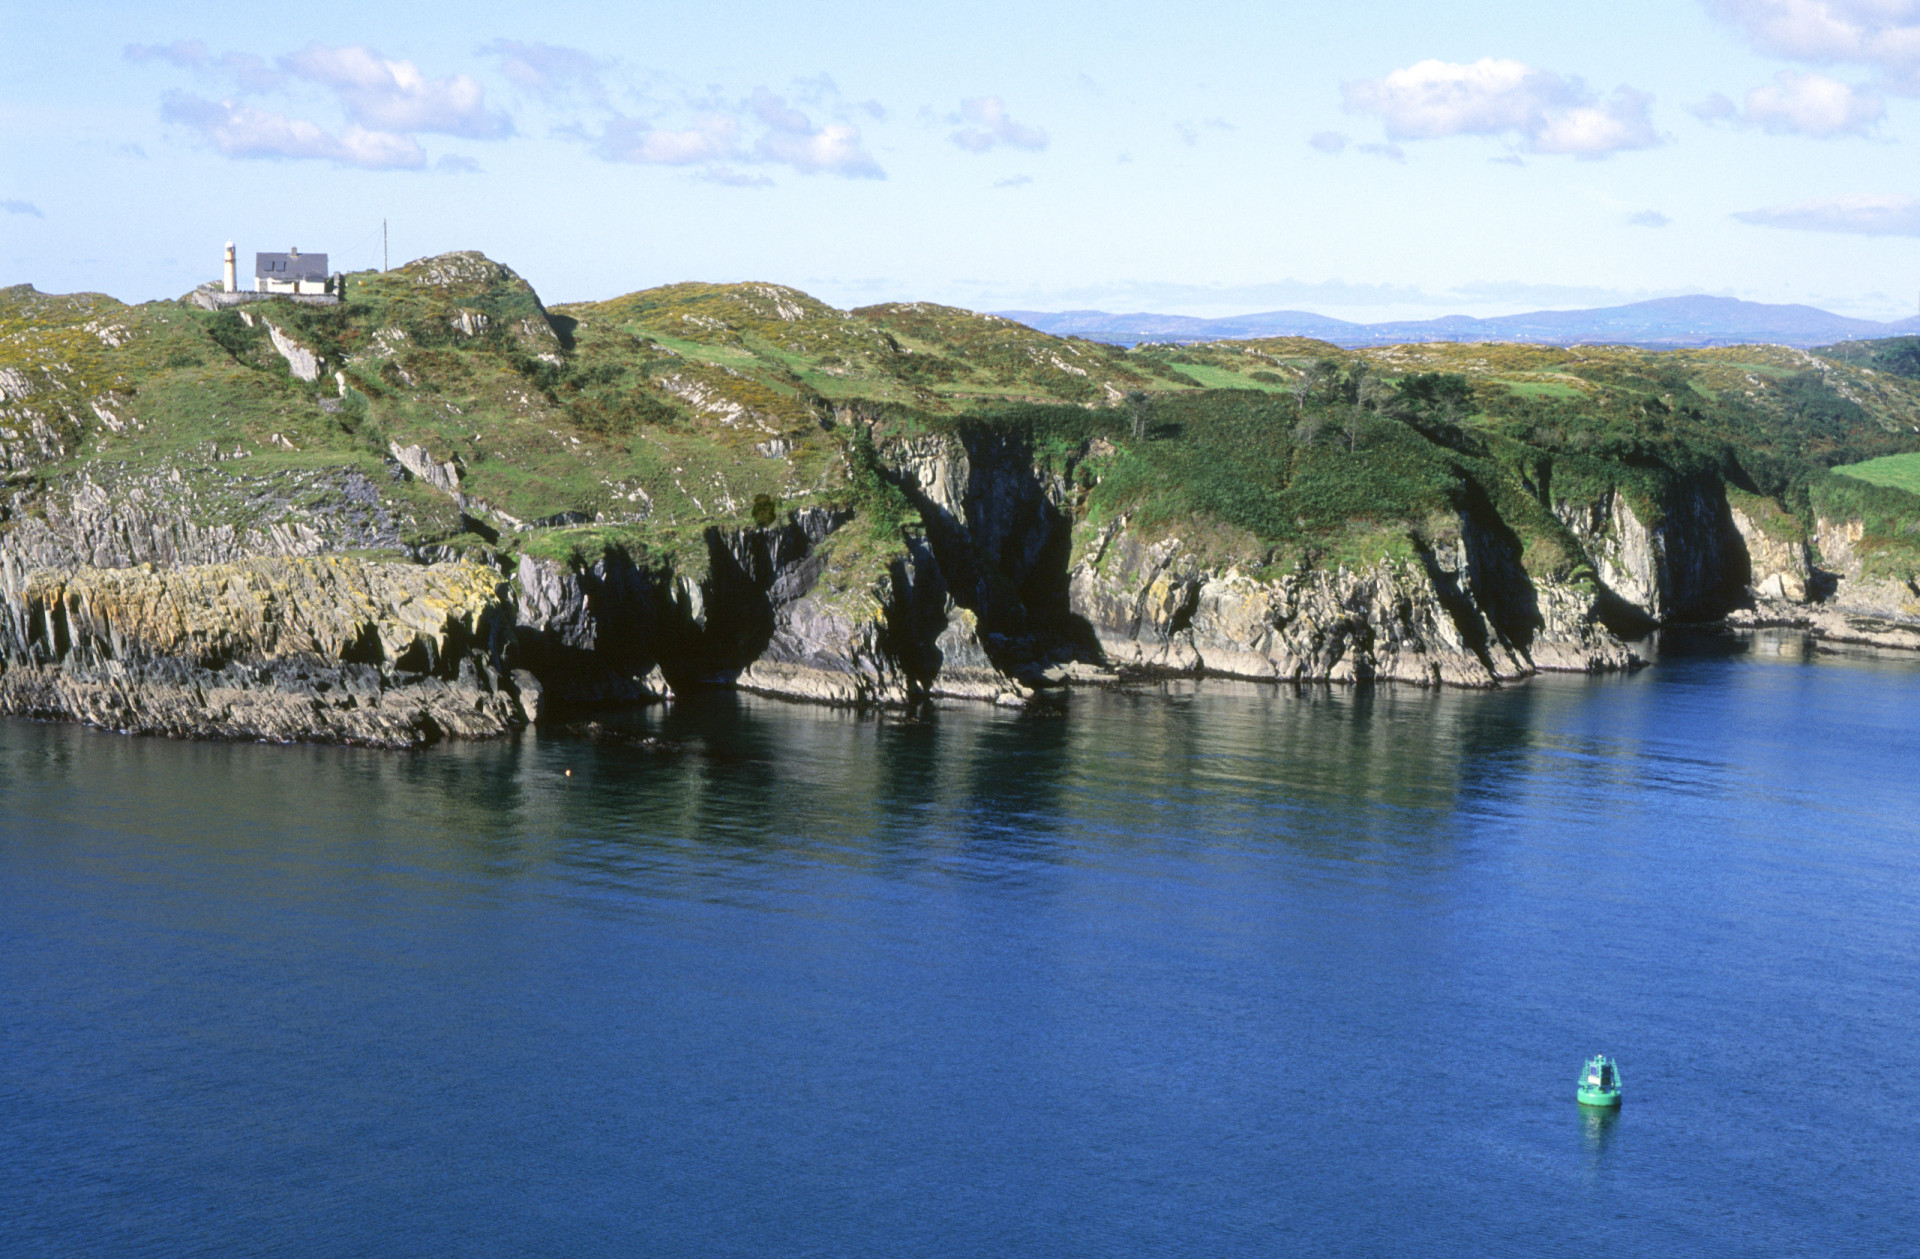 <p>The most accessible island in Ireland, Sherkin Island is a short 10-minute ferry ride from the harbor in Baltimore, Co. Cork.</p><p><a href="https://www.msn.com/en-au/community/channel/vid-7xx8mnucu55yw63we9va2gwr7uihbxwc68fxqp25x6tg4ftibpra?cvid=94631541bc0f4f89bfd59158d696ad7e">Follow us and access great exclusive content every day</a></p>